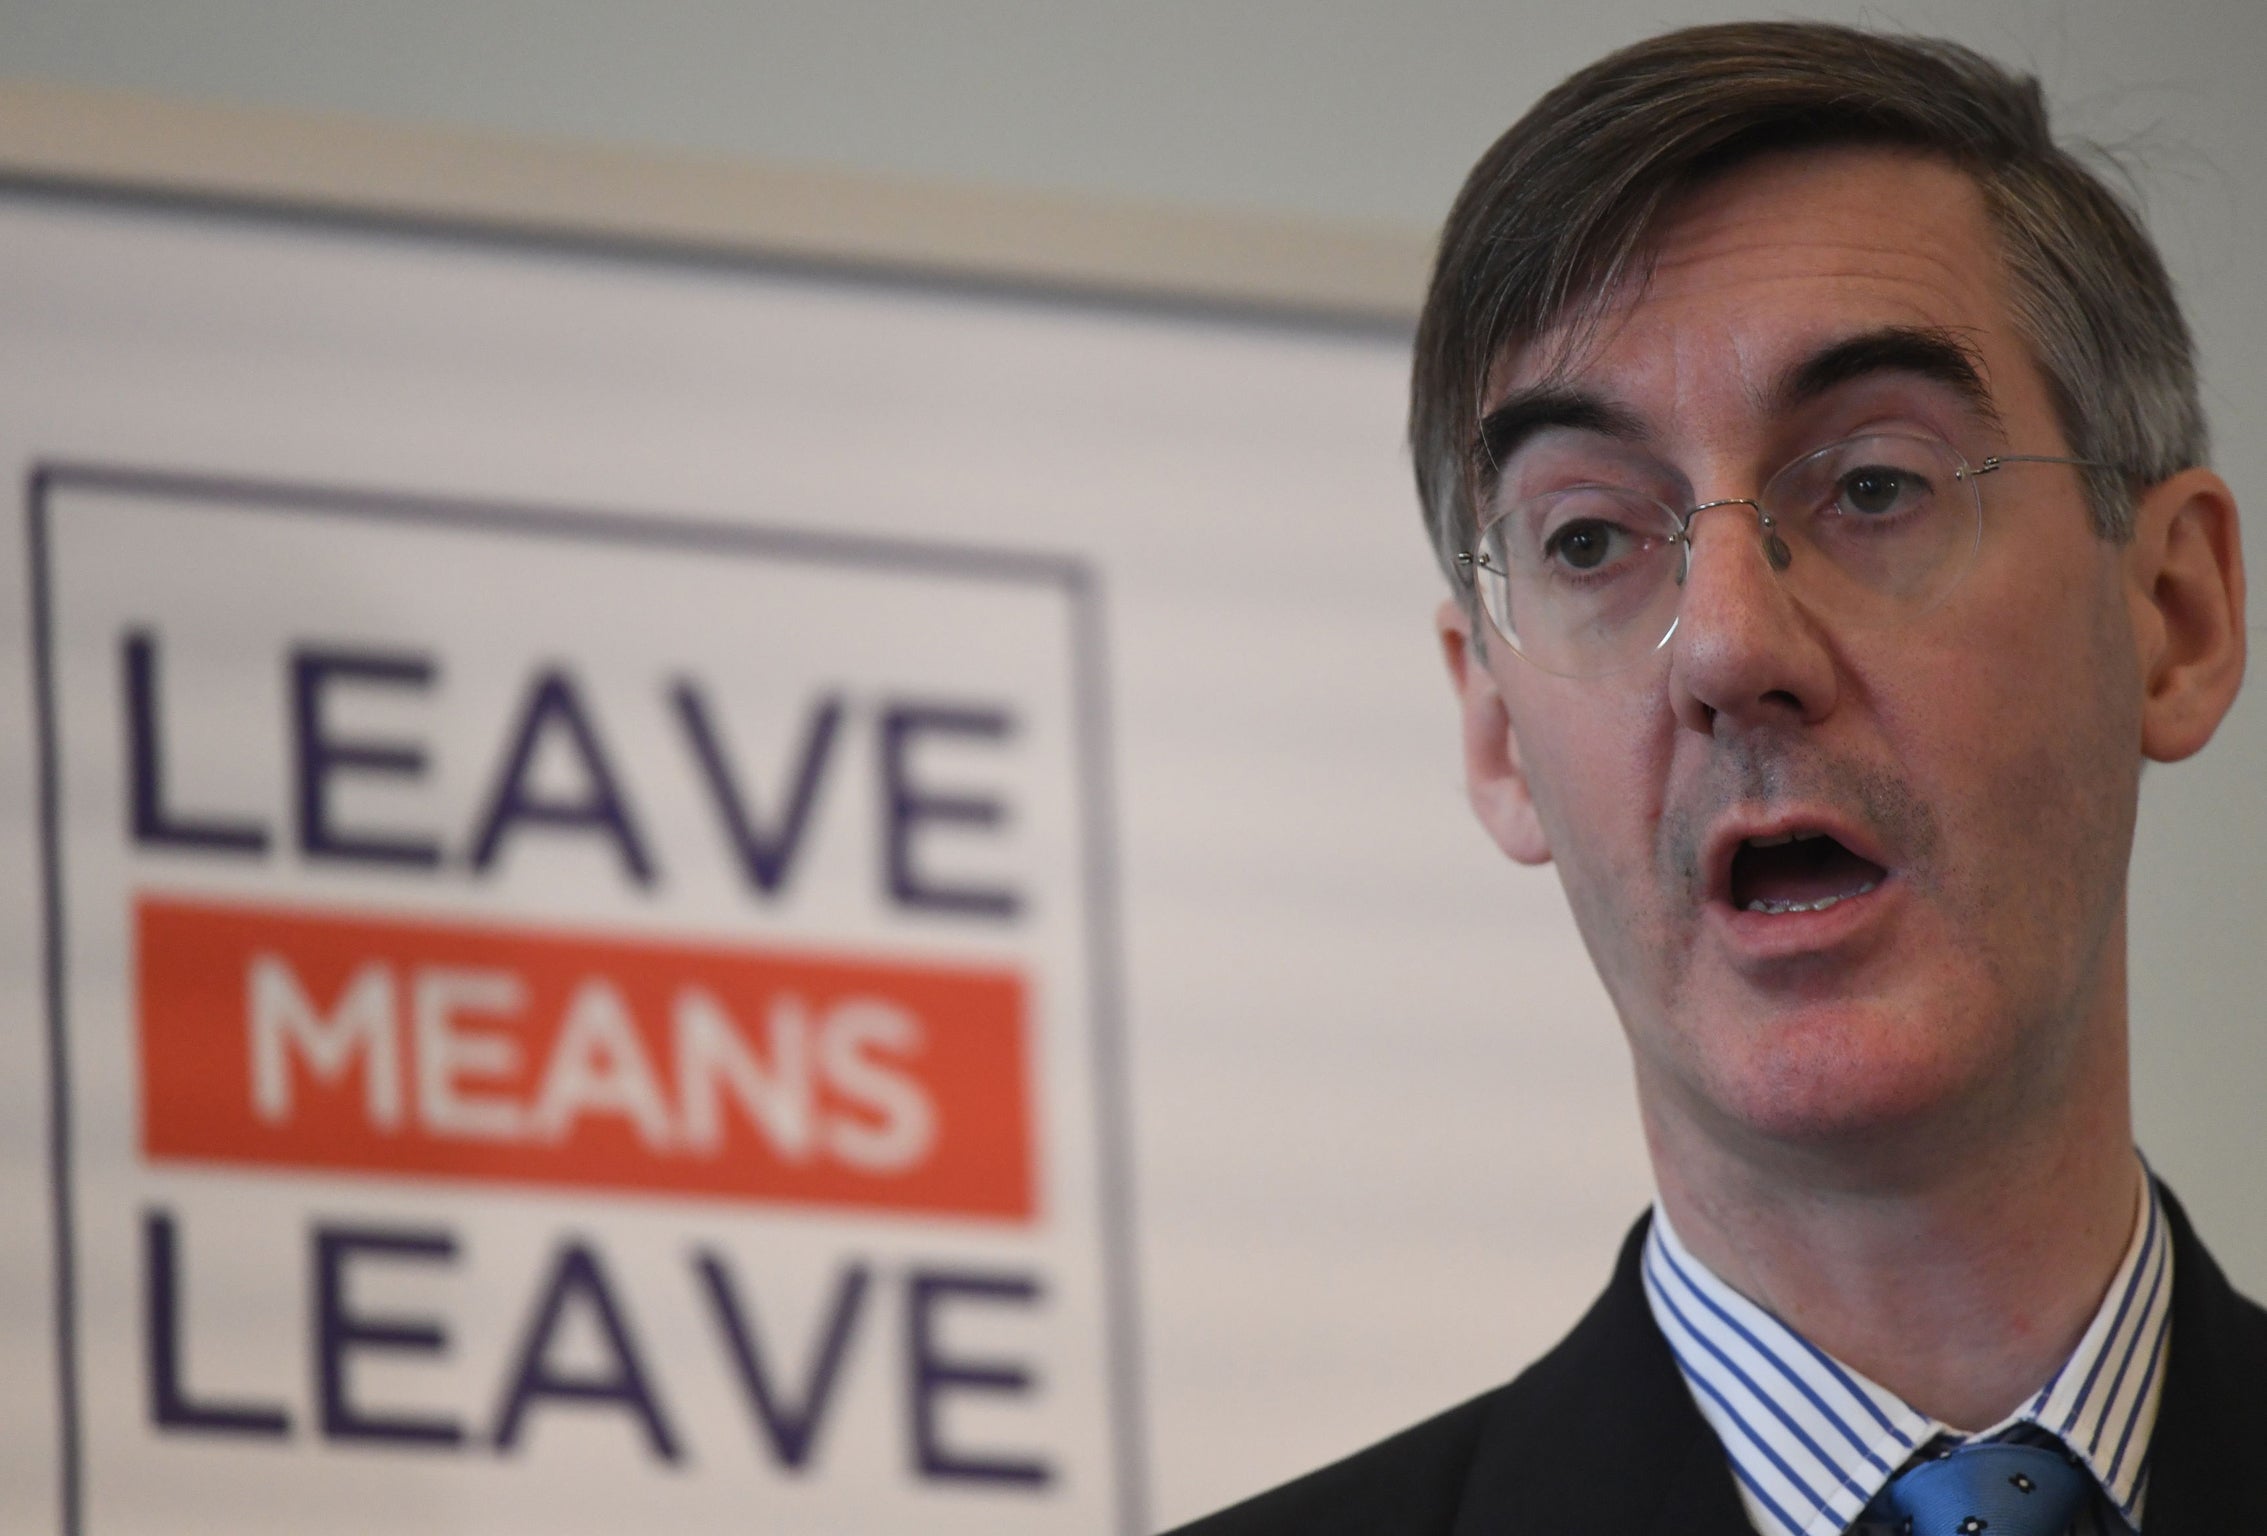 Supporters such as Dominic Raab, Priti Patel and Jacob Rees-Mogg (above) had not even been involved with the ERG before the shock Leave vote